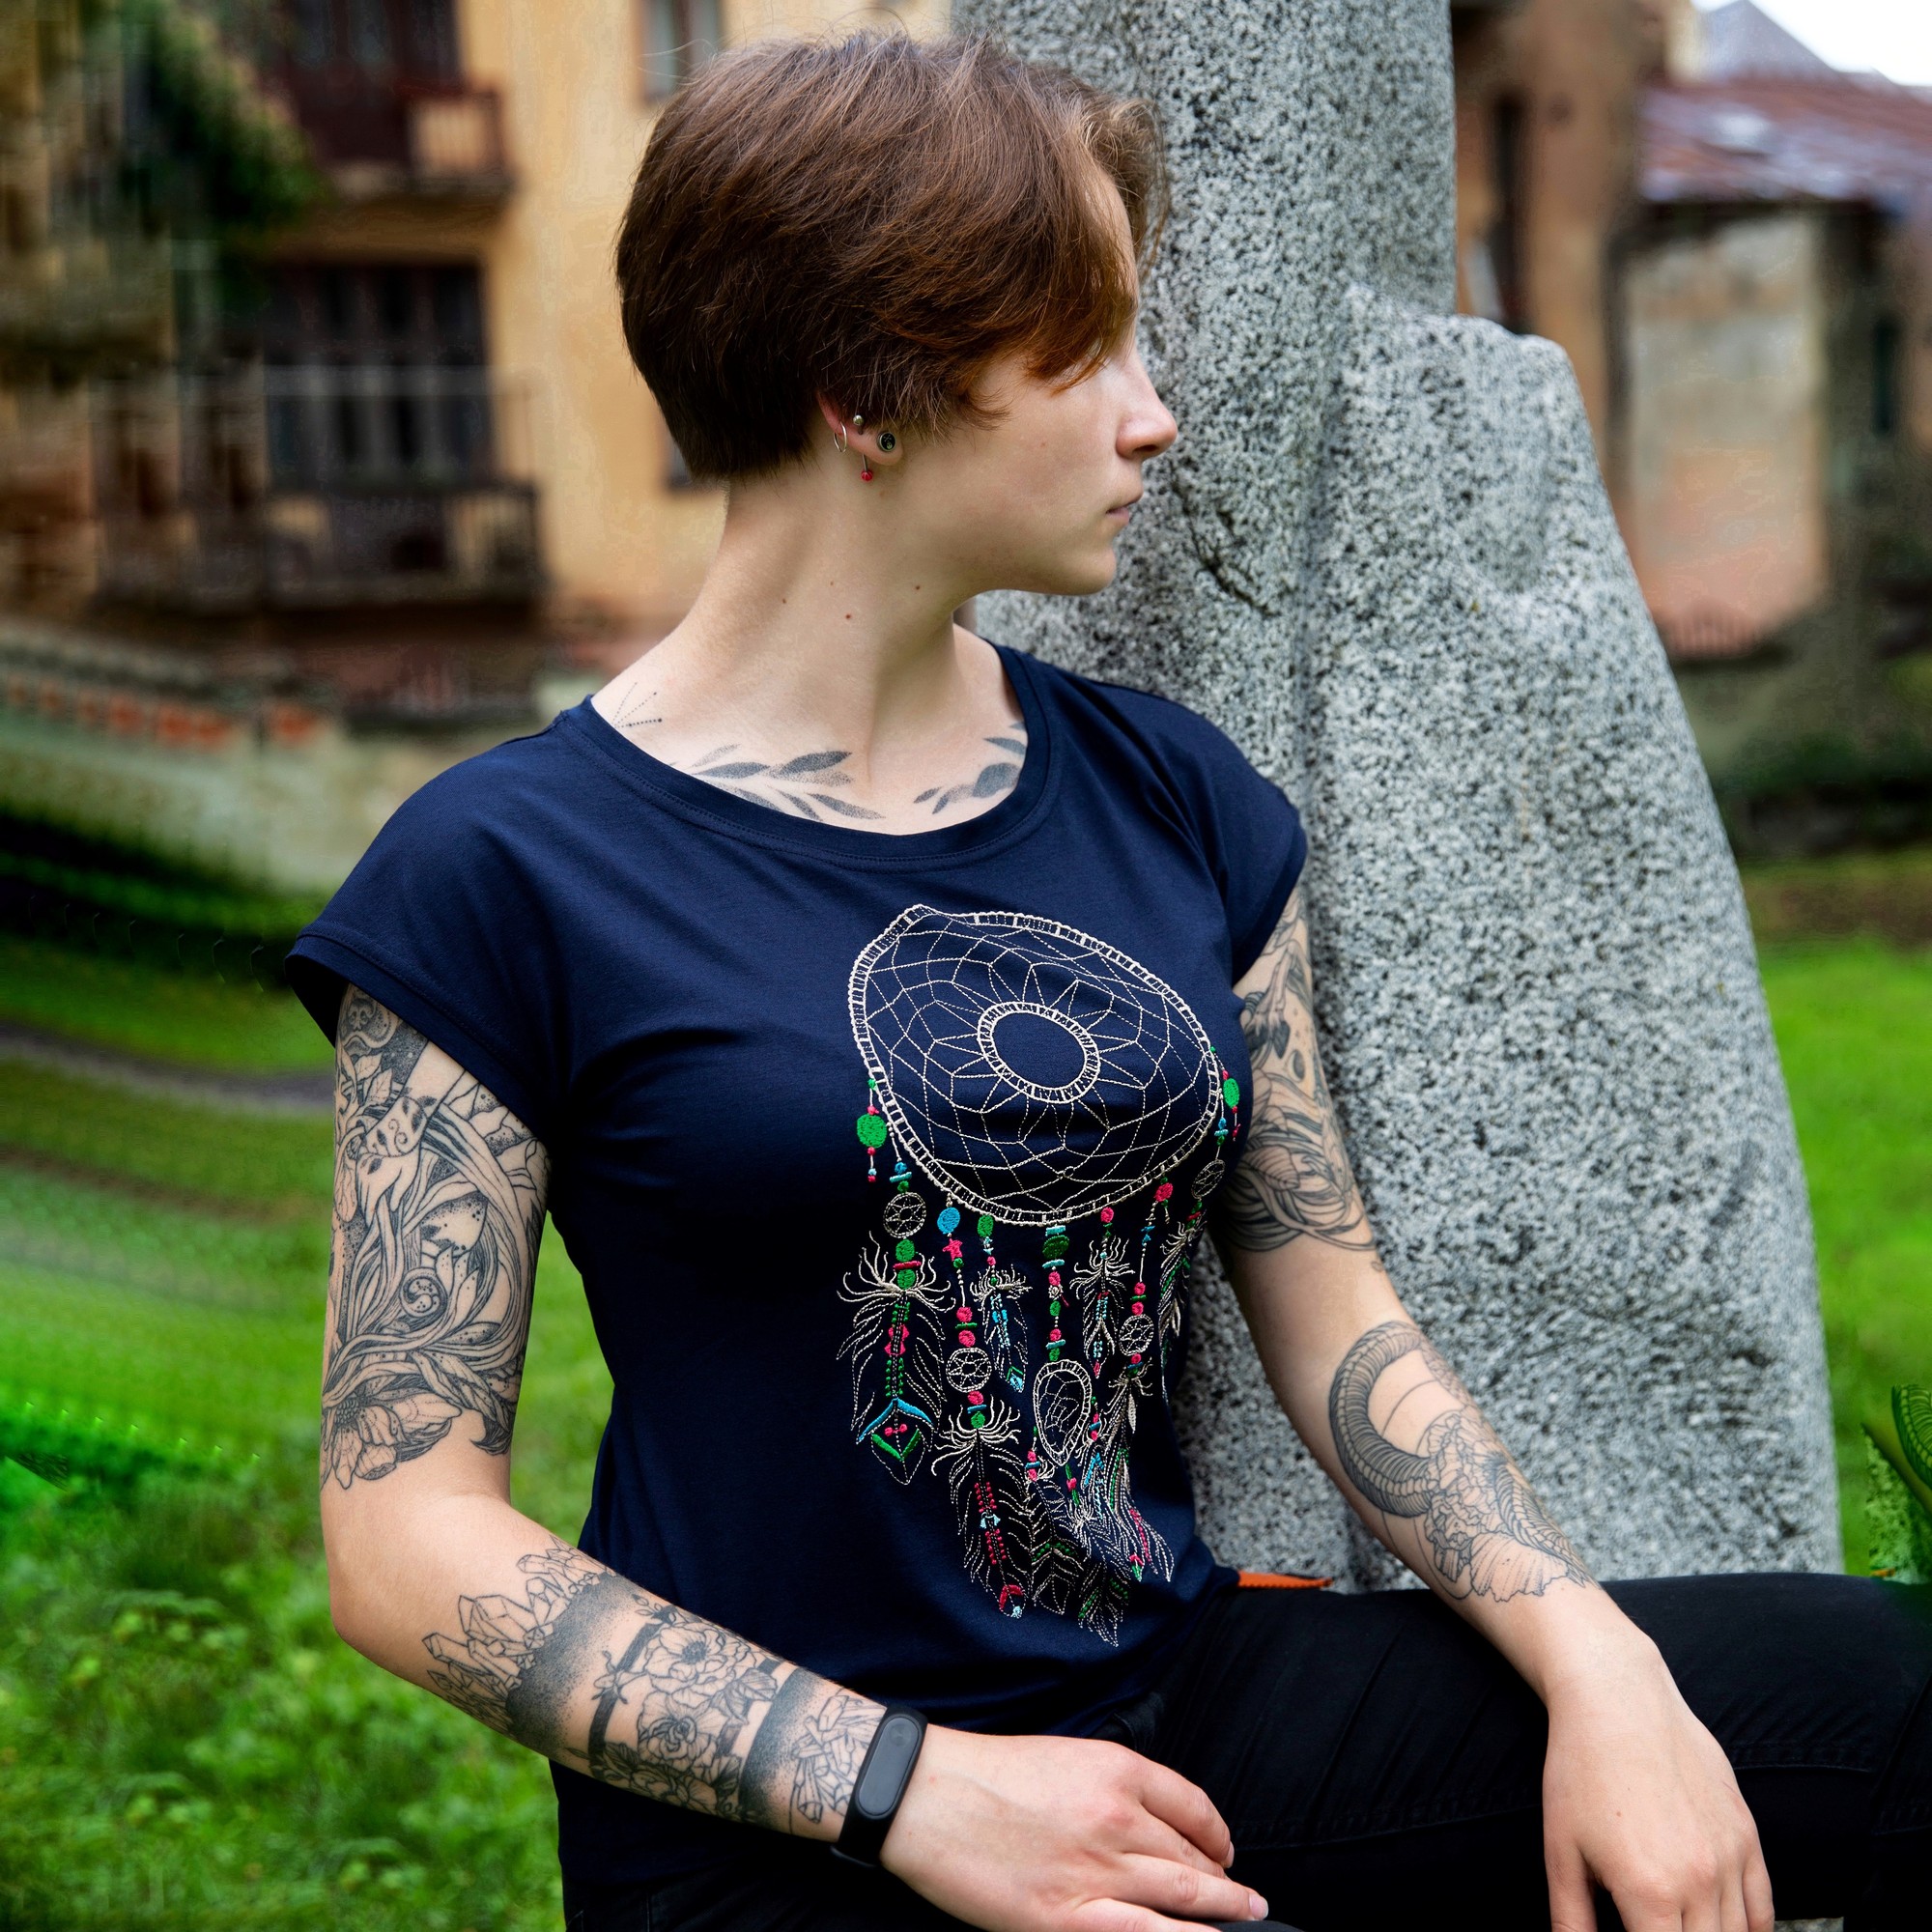 Women's T-shirt with embroidery - "Dream Catcher"